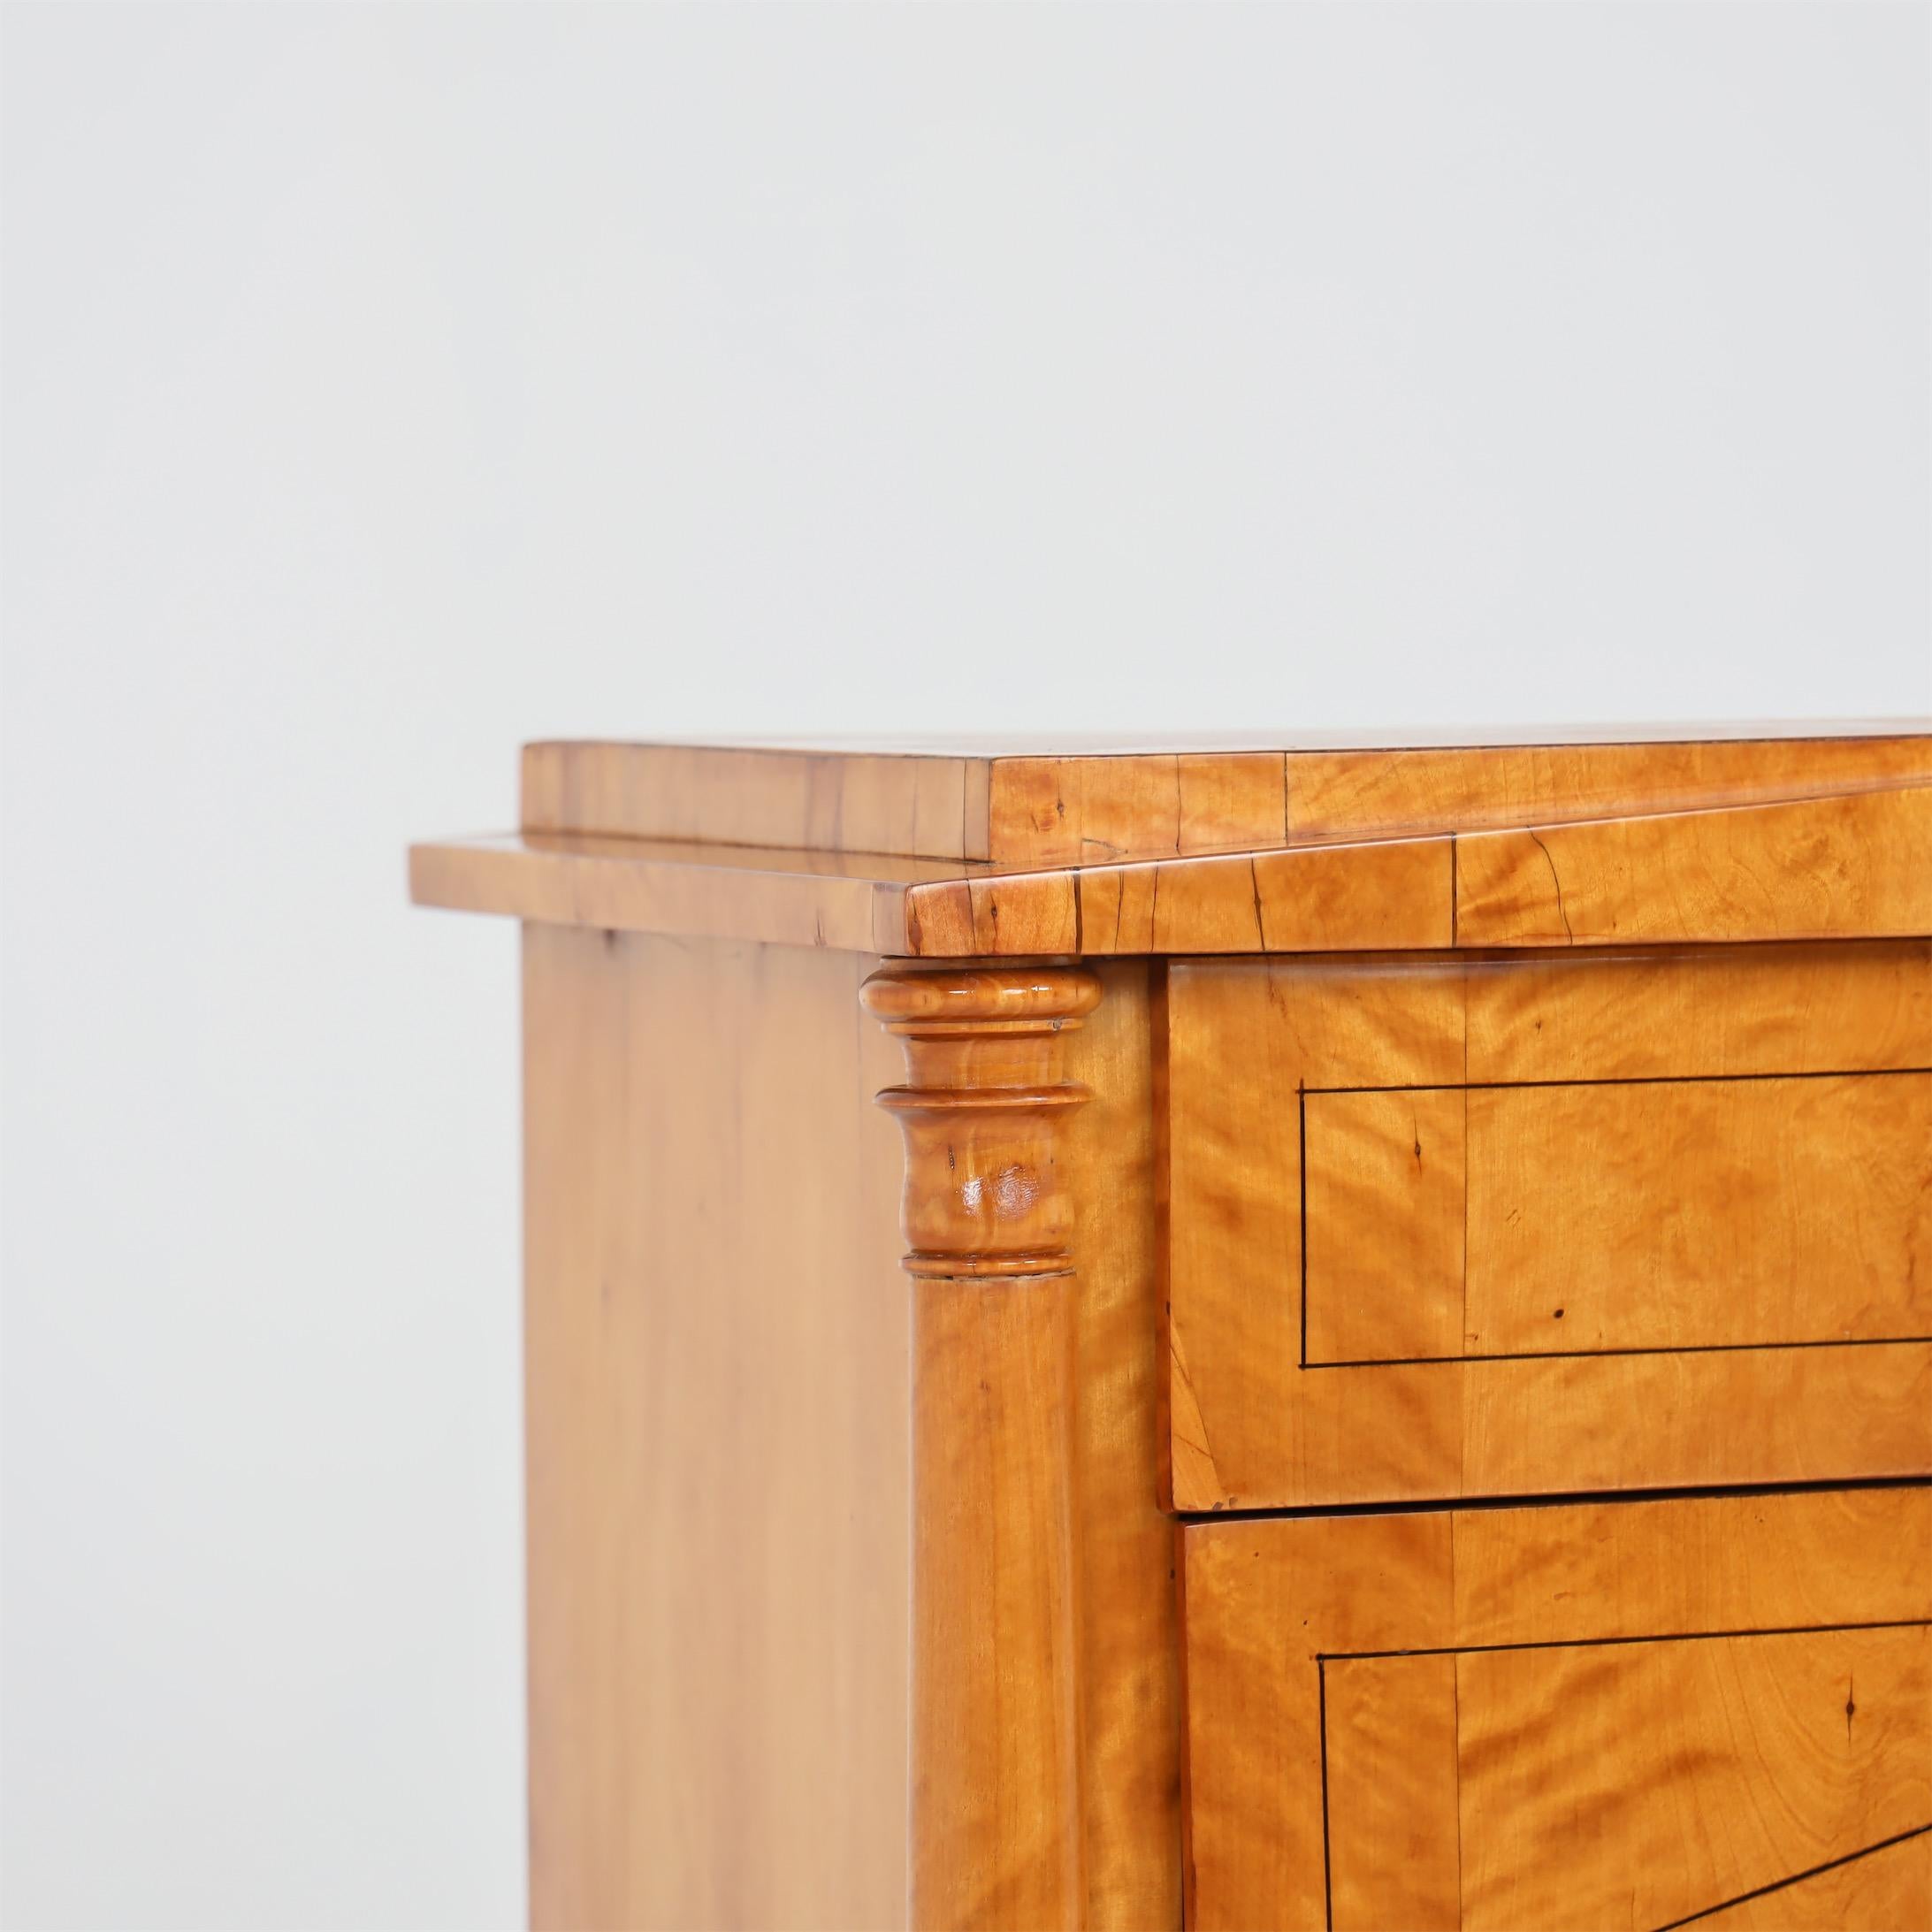 Biedermeier chest of drawers with three drawers standing on square legs. The body is veneered in birch and flanked by three-quarter columns at the corners, which support the surrounding edge executed as a pediment. The front shows thread inlays as